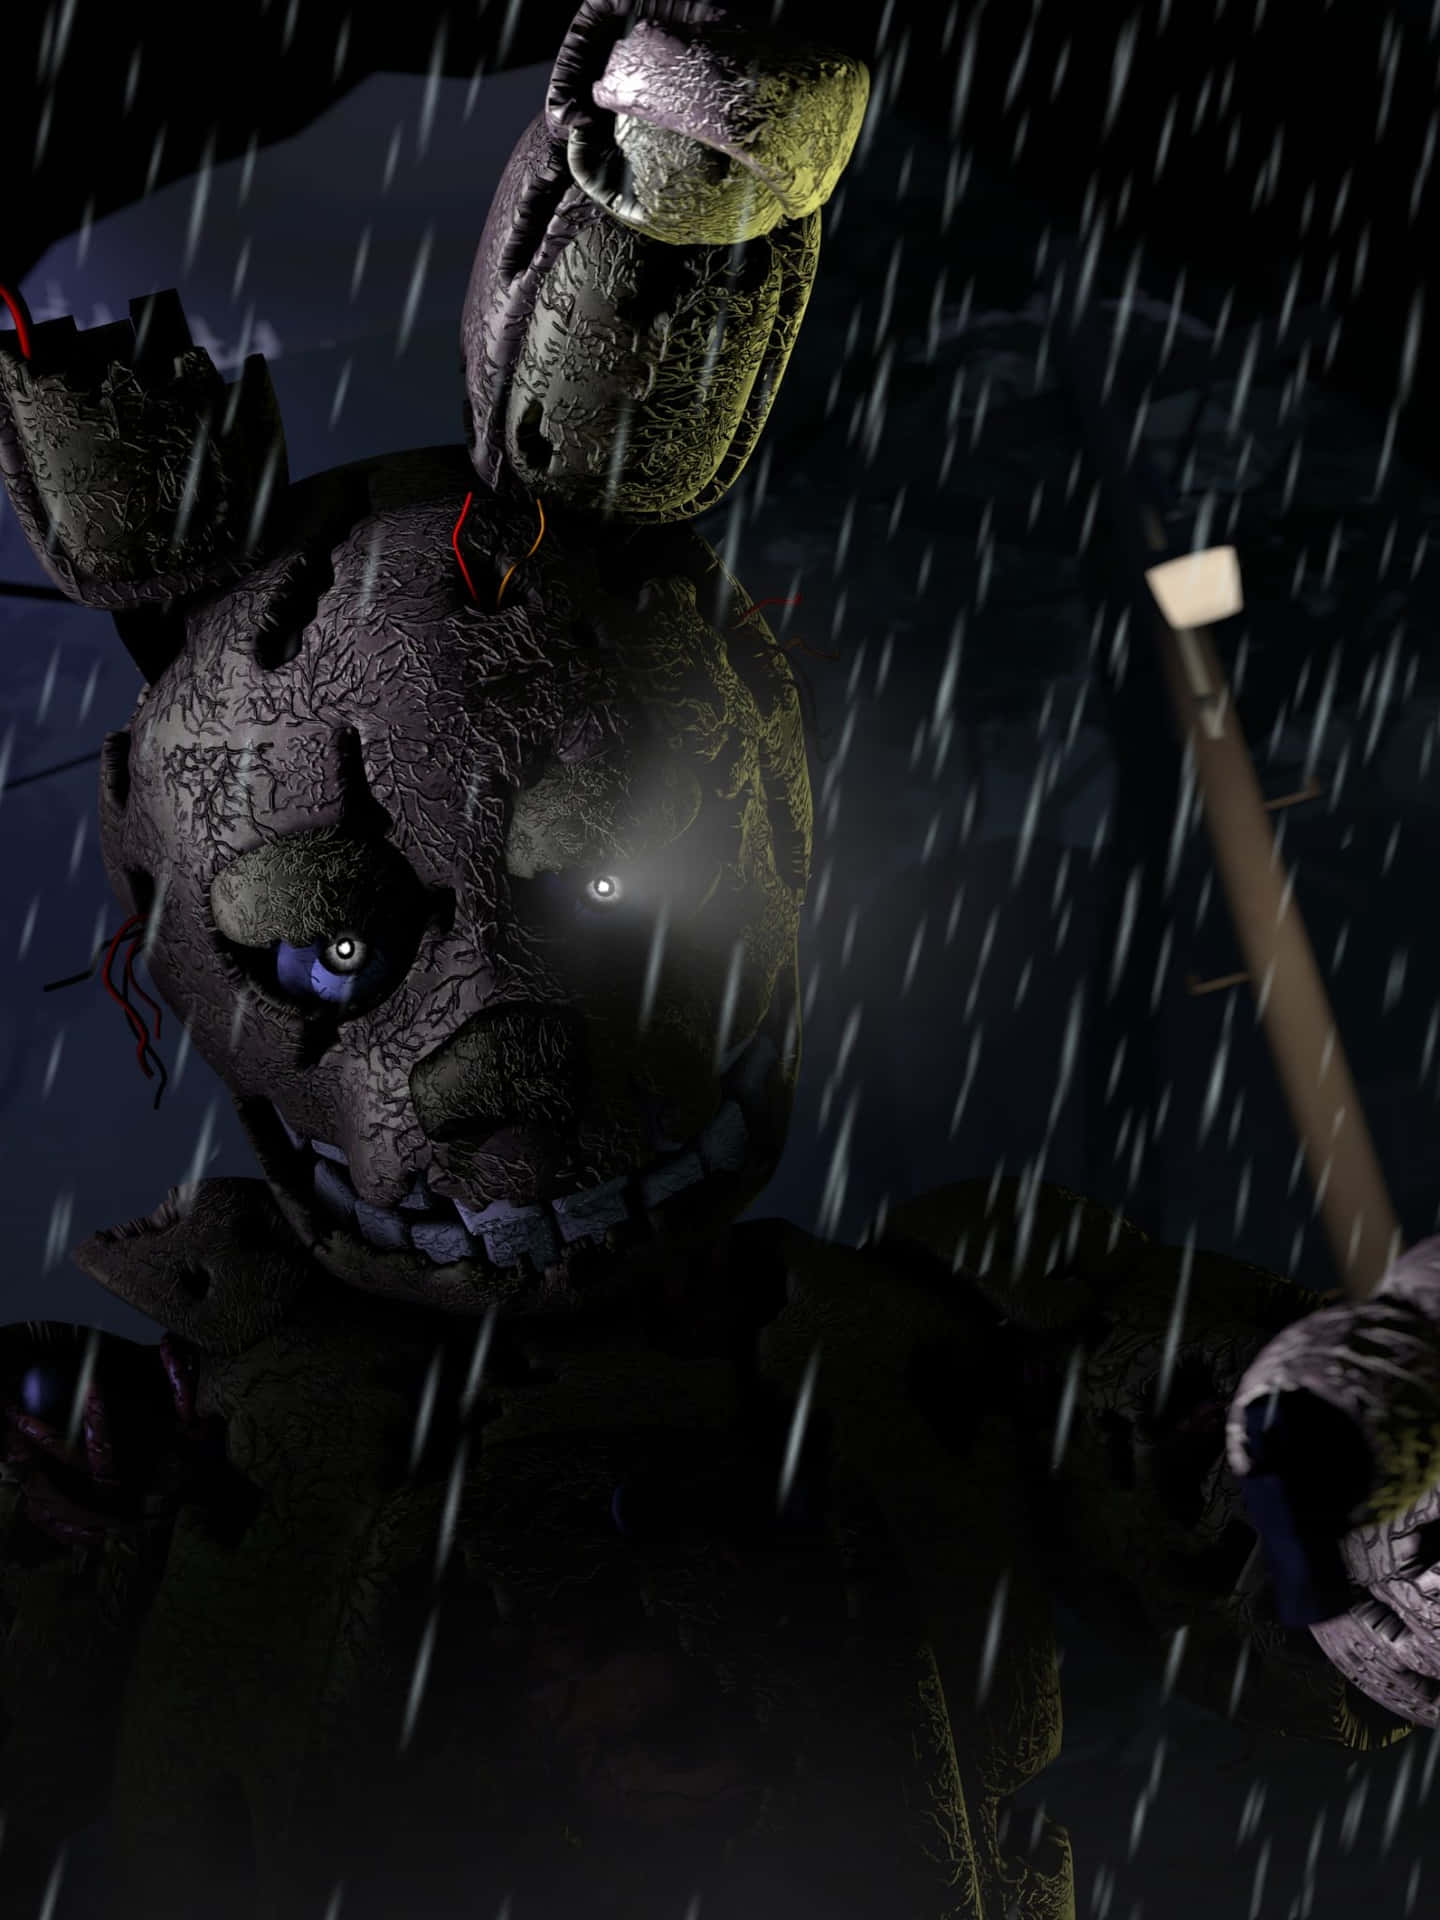 Get ready to play Five Nights at Freddy's on your iPhone! Wallpaper